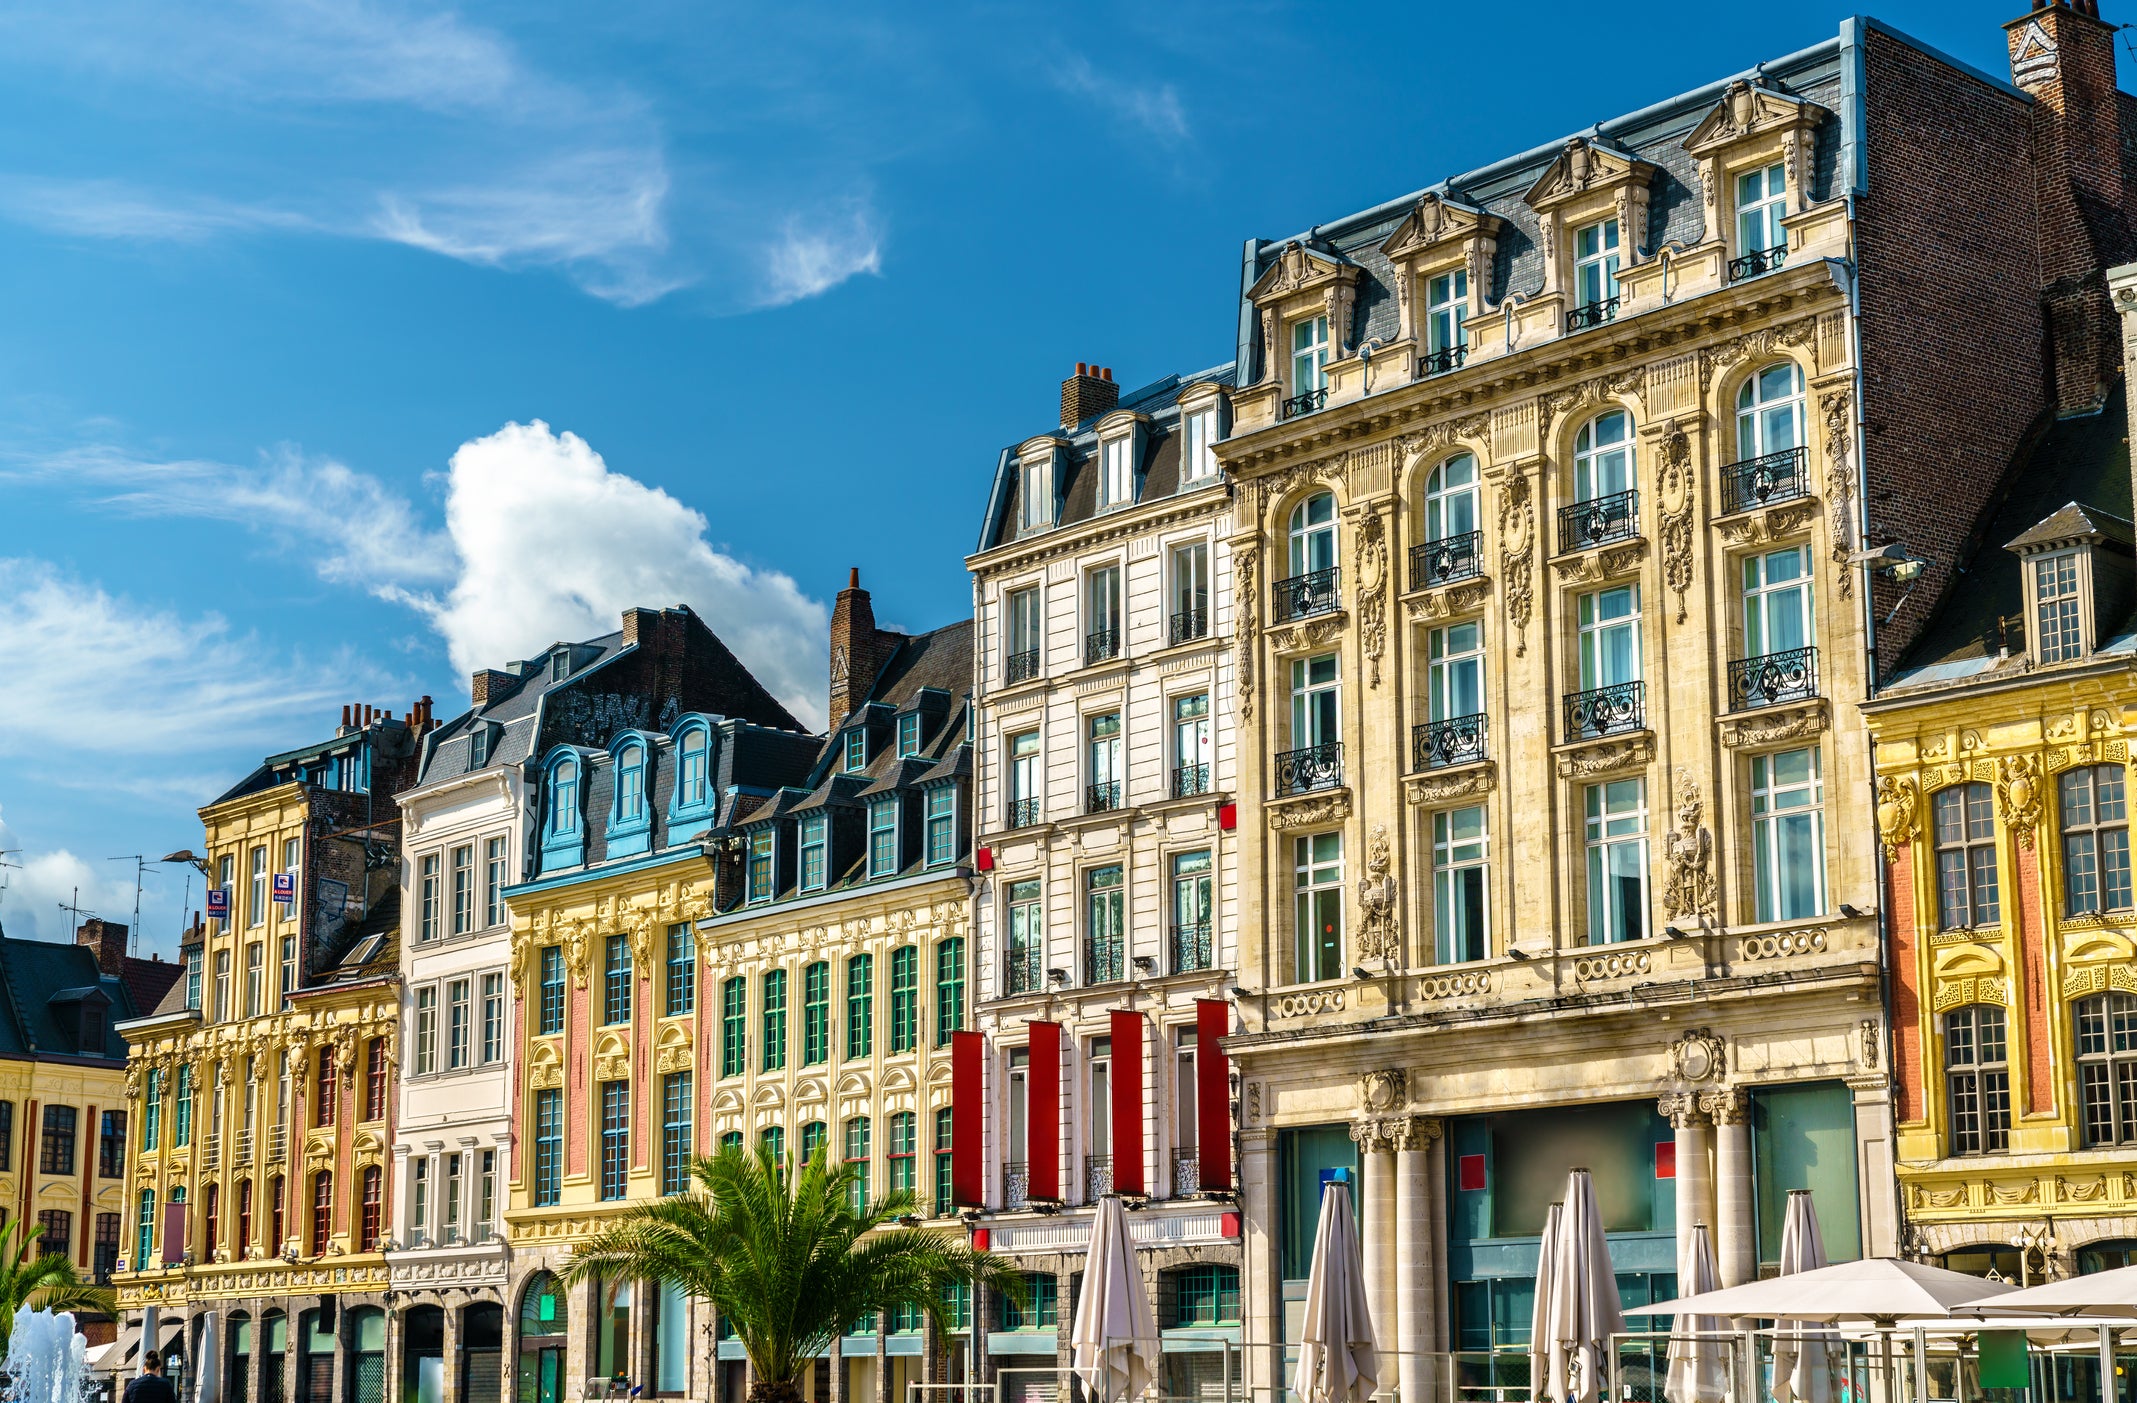 It’s fine art, patisseries and quaint B&Bs for lovers in Lille